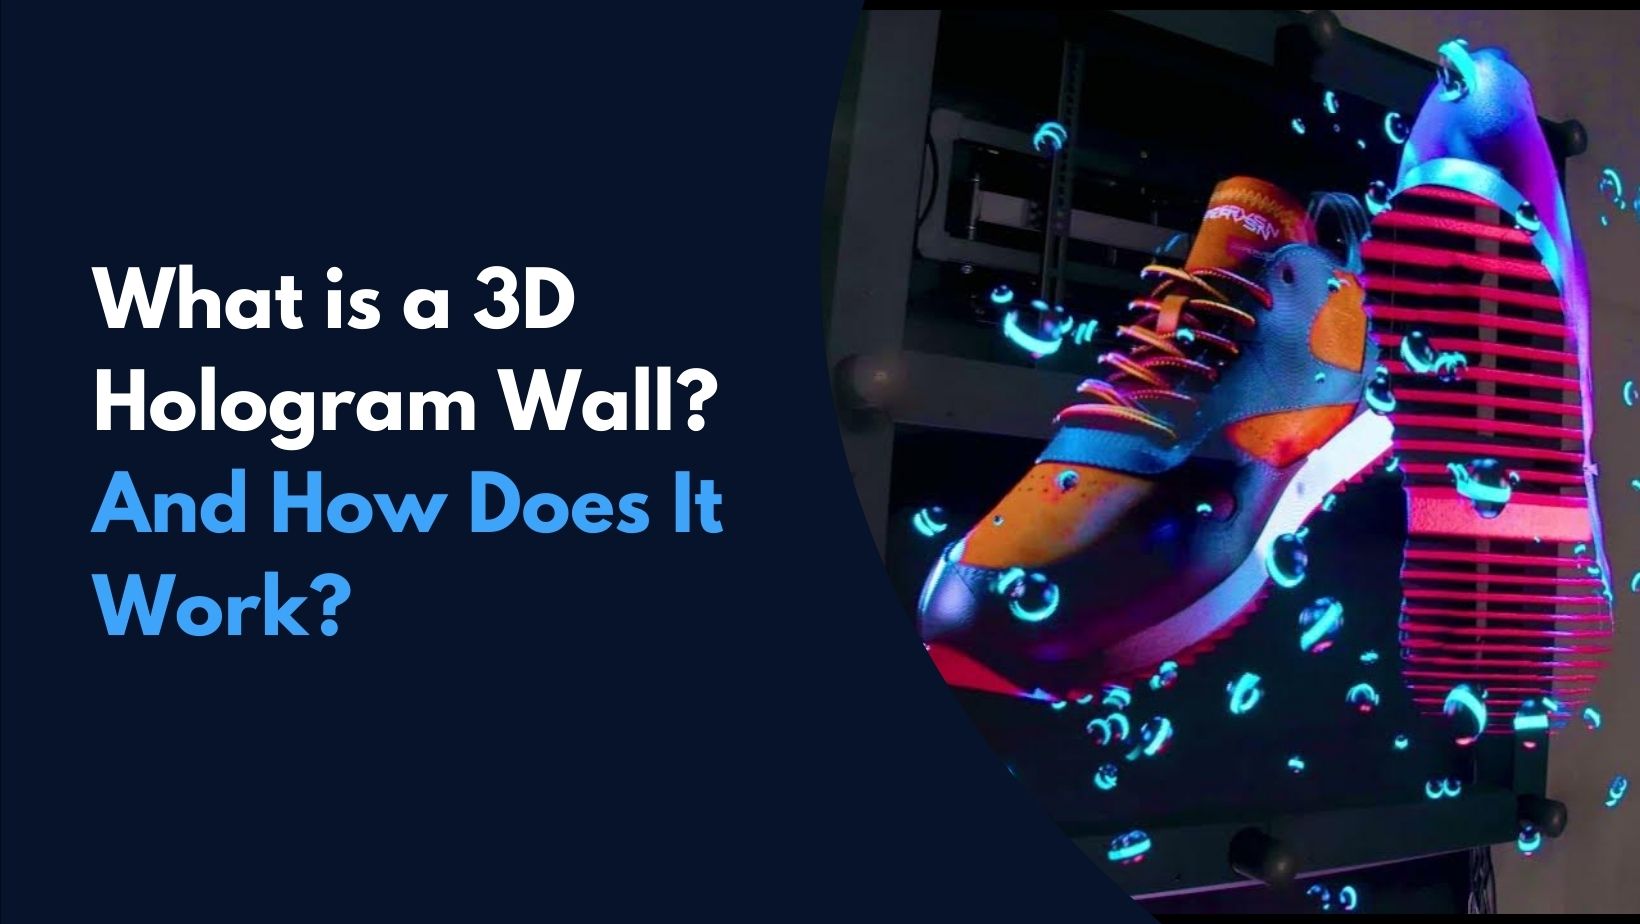 What is a 3D Hologram Wall and How Does it Work?